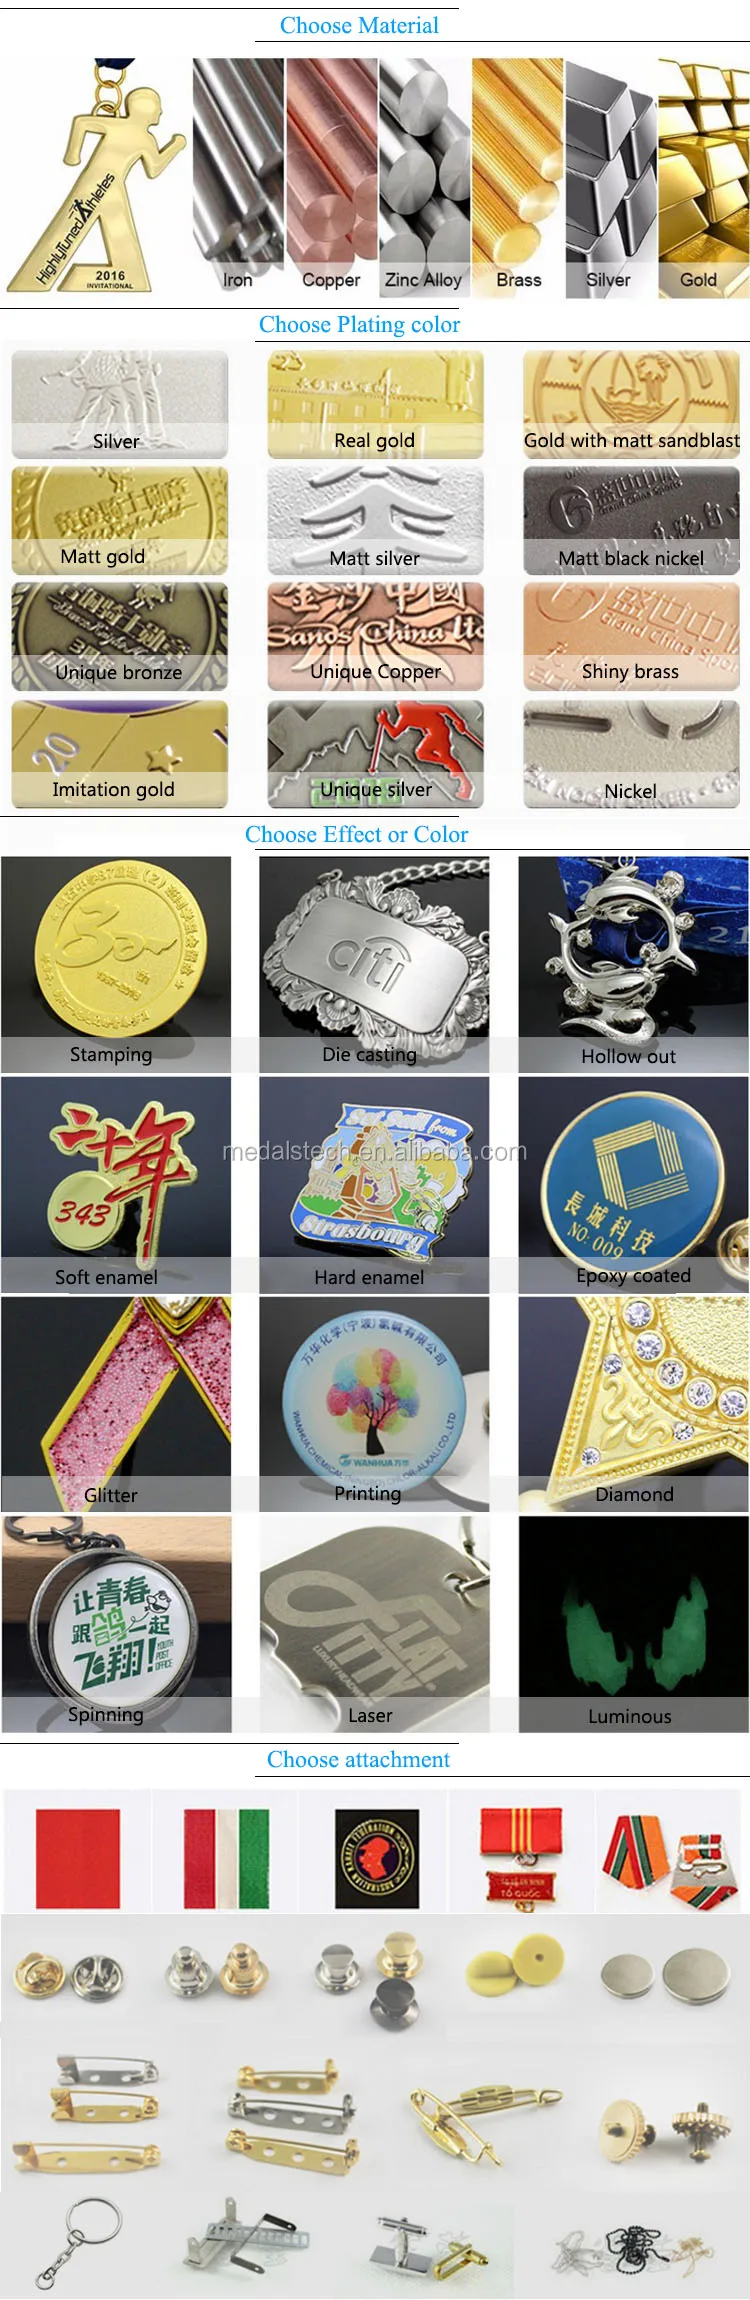 Custom cheap code printing metal double sides epoxy  pets tag